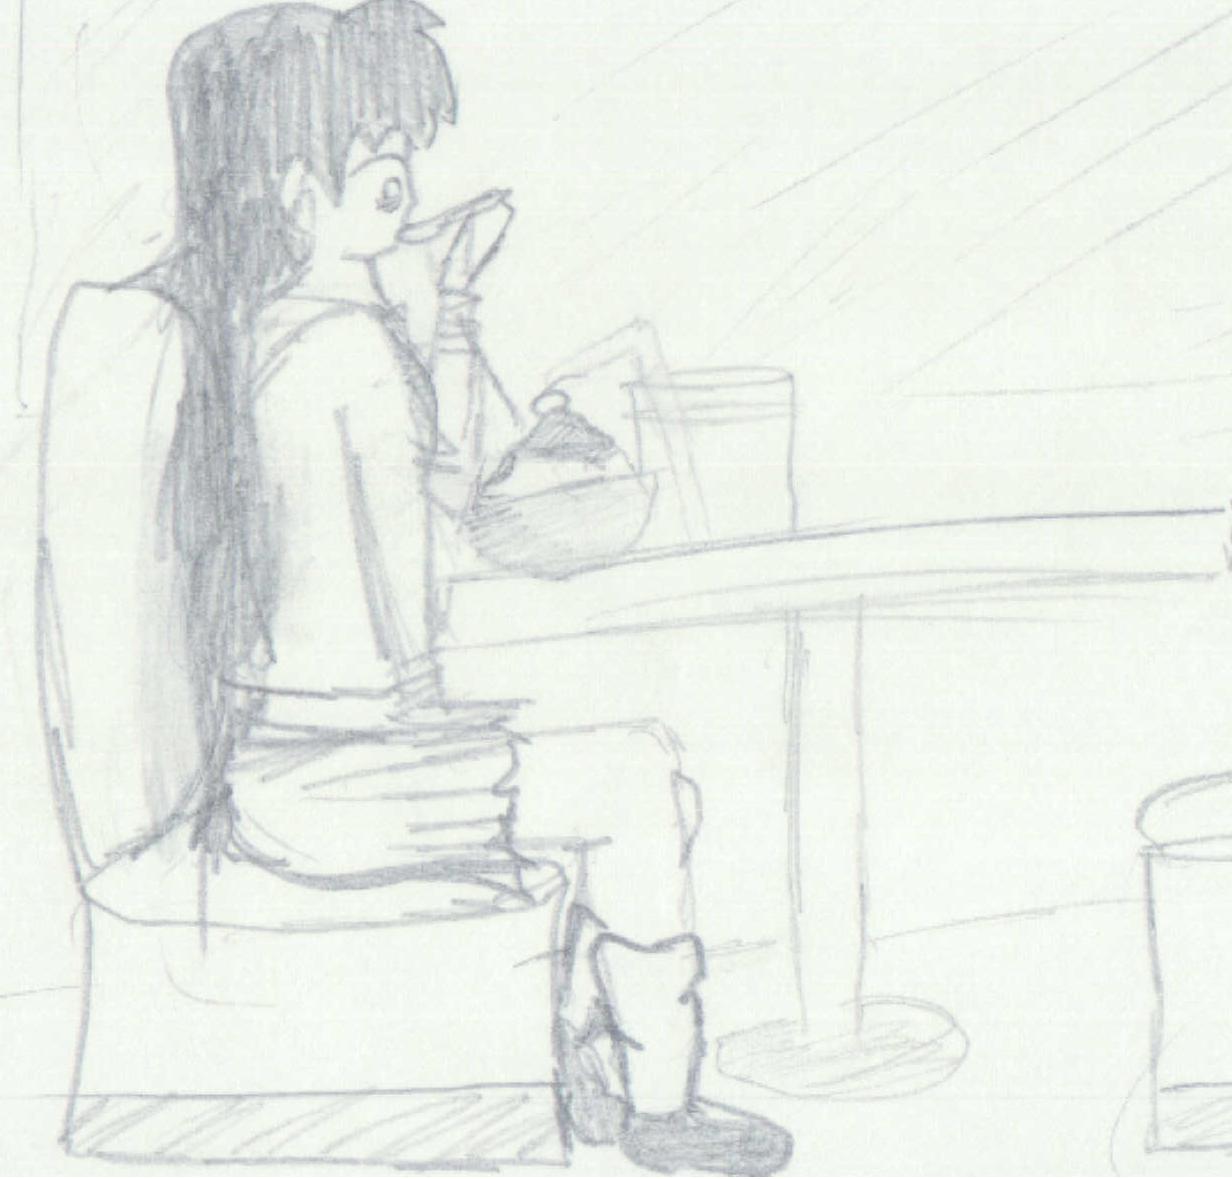 'Kagome at the ice cream parlor' by Roytheraccoon